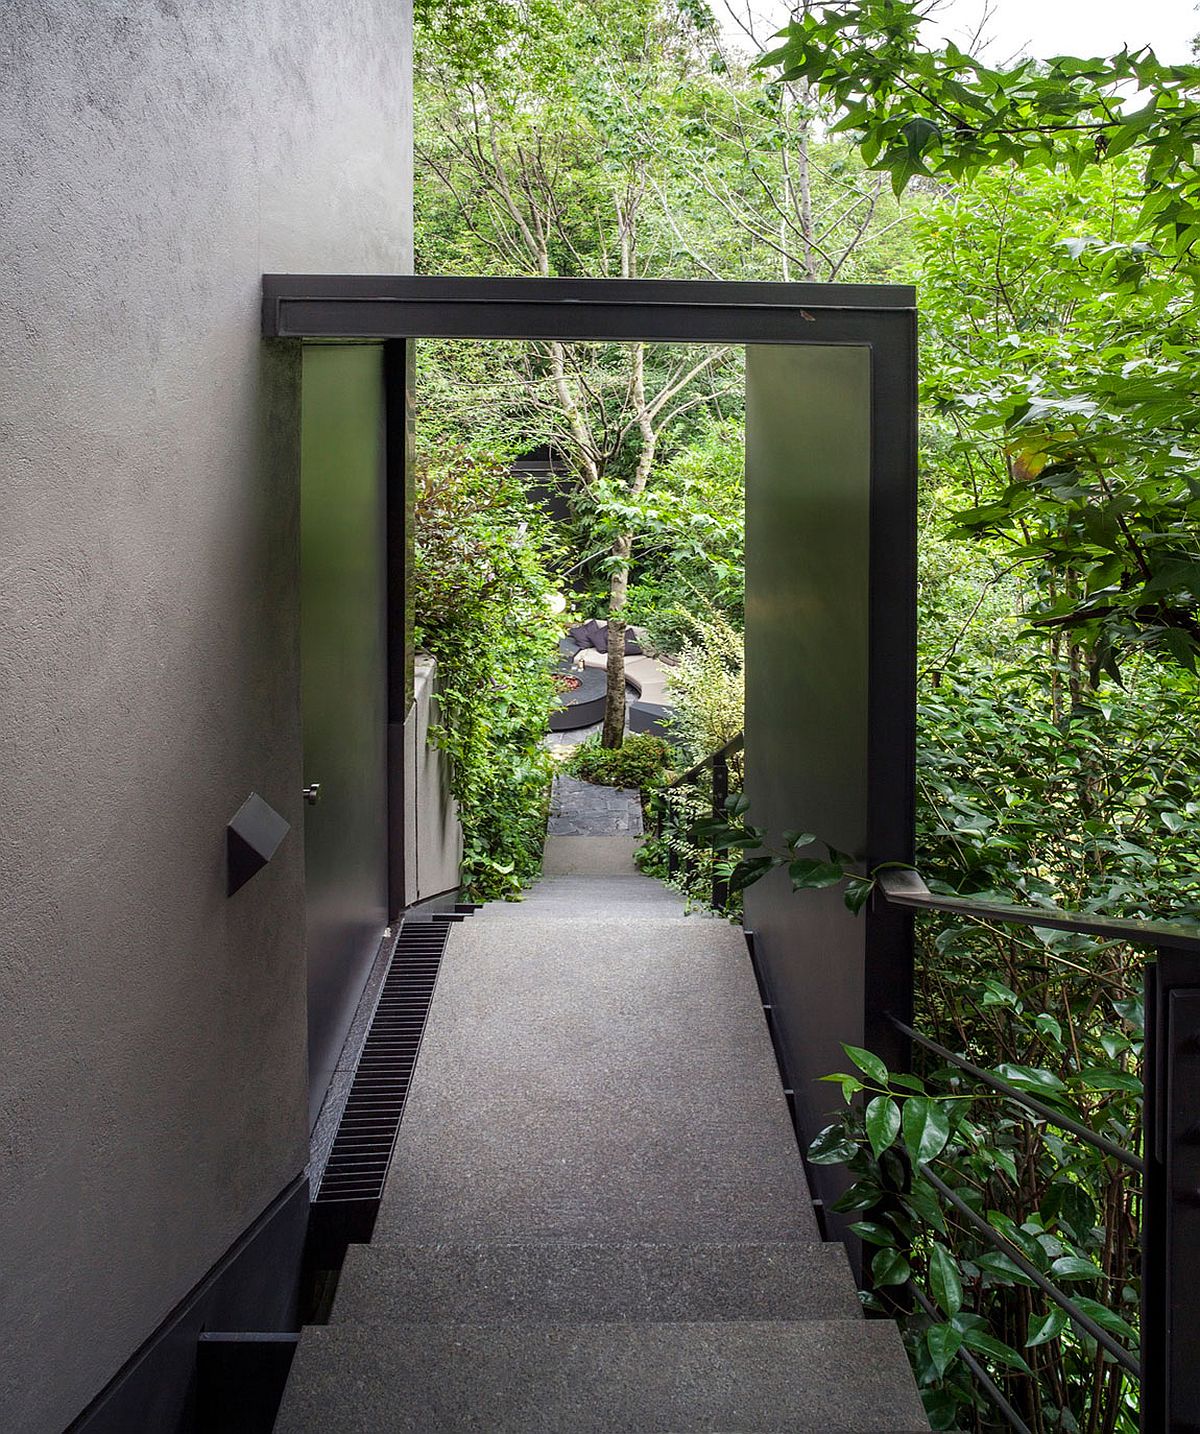 Staircase-leading-the-house-surrounded-by-greenery.jpg